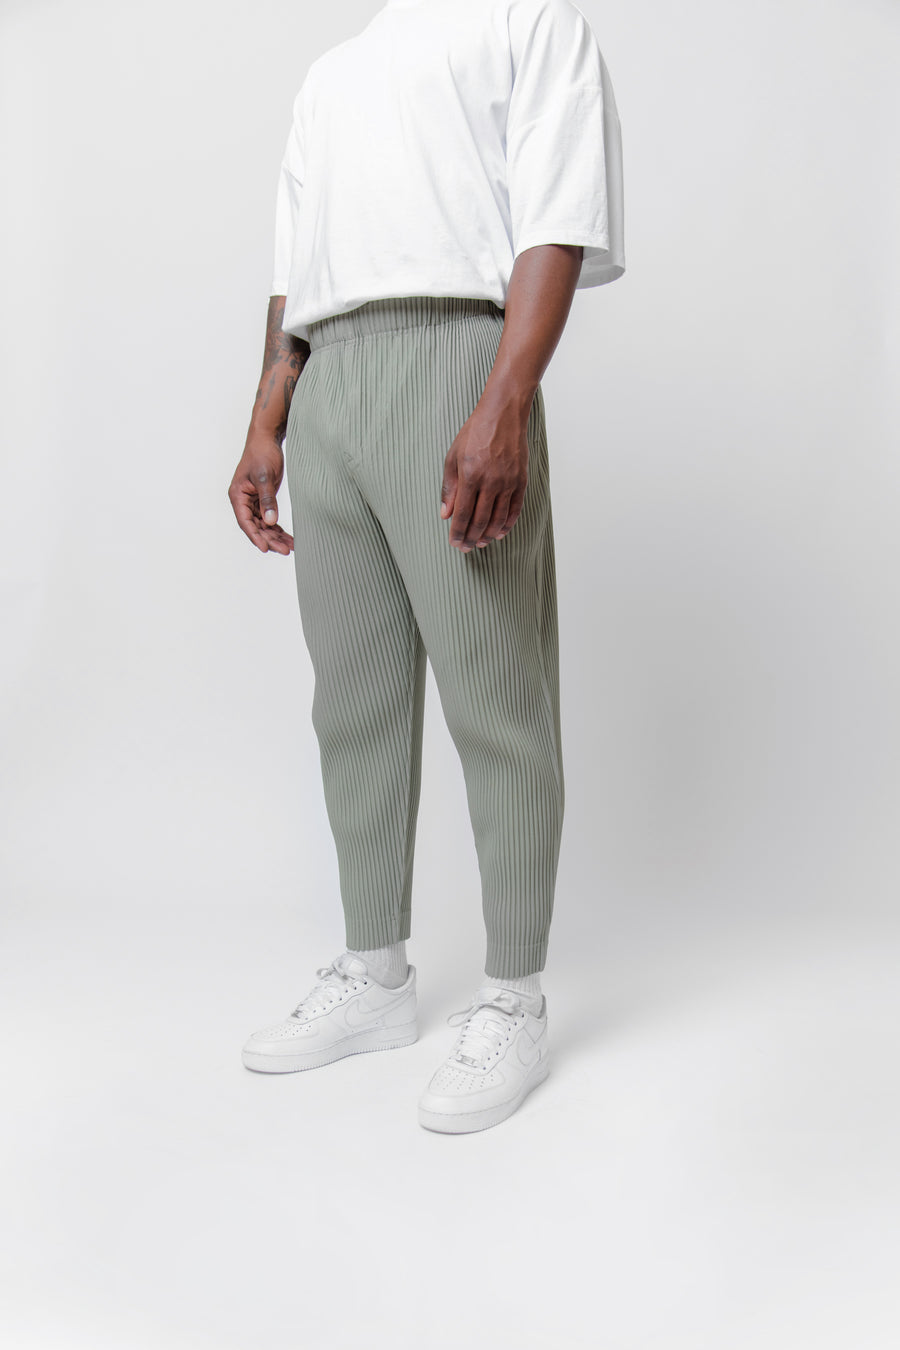 MC December Pleated Trouser Green Hued JF129-60